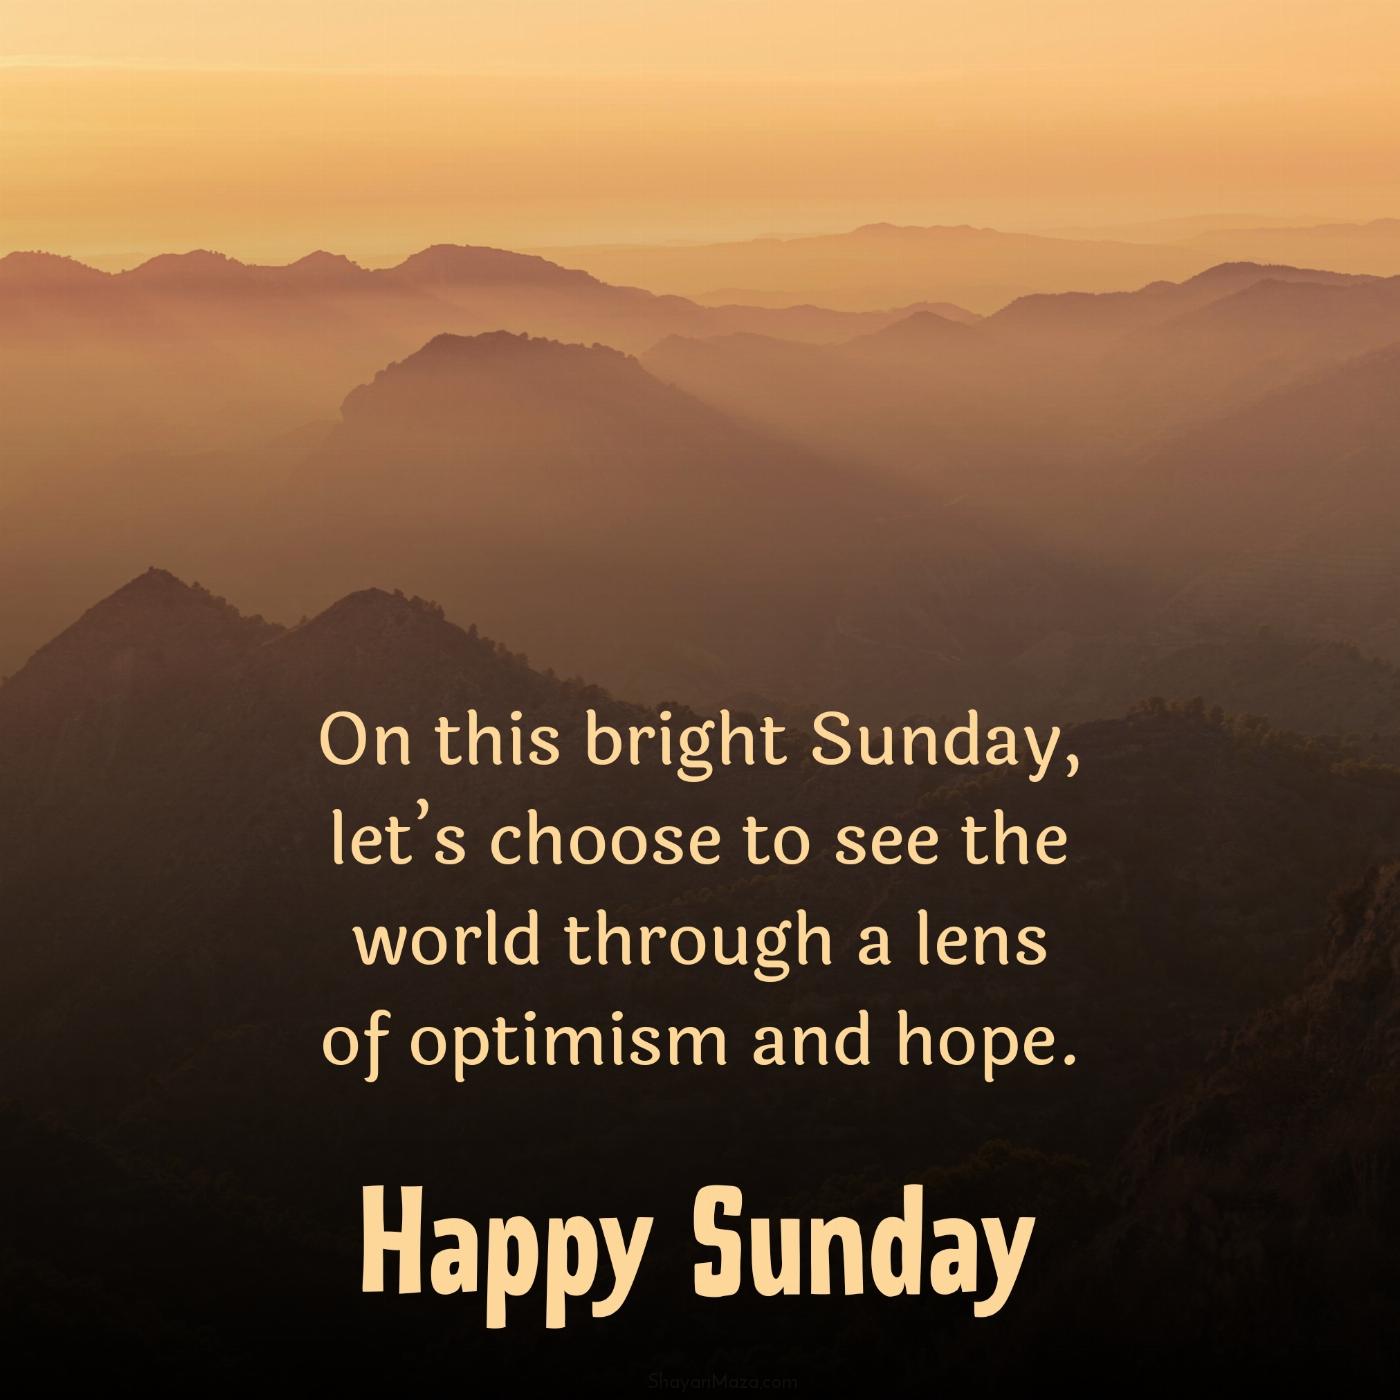 On this bright Sunday lets choose to see the world through a lens